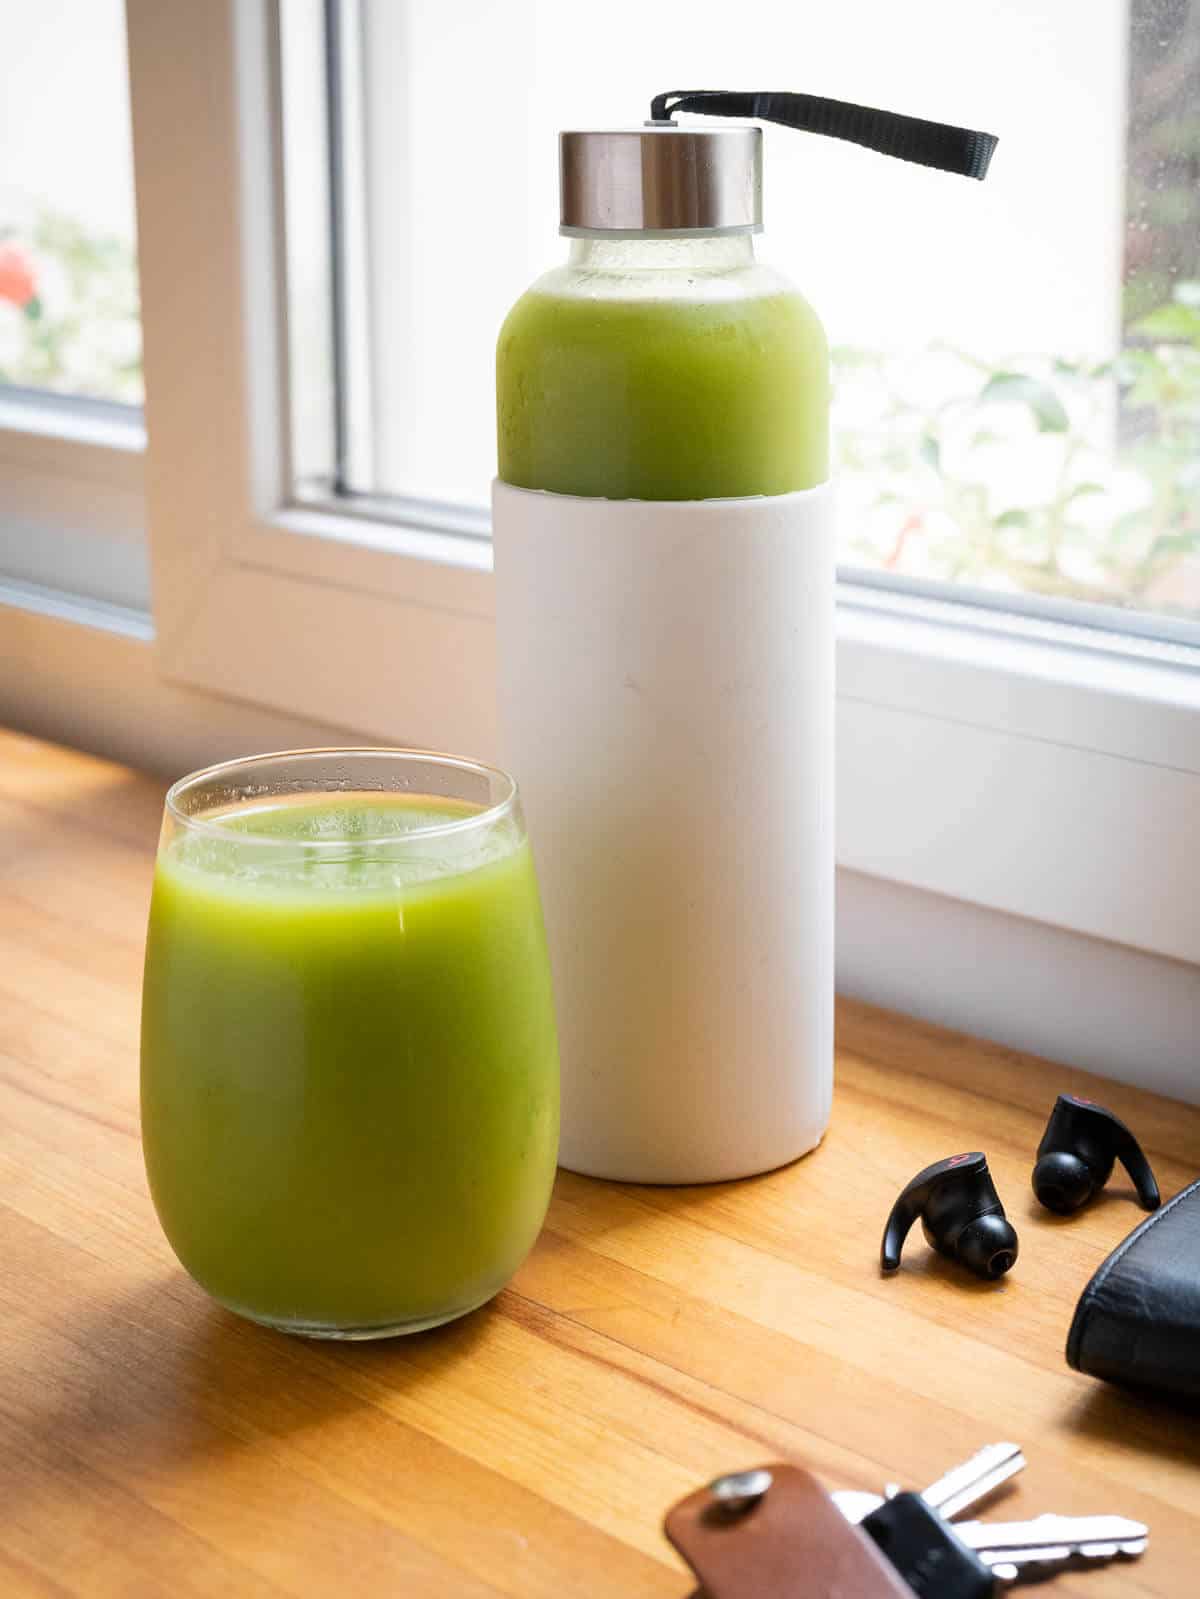 storing juice tips, three airtight glass containers with white silicon sheath and green juice glass.